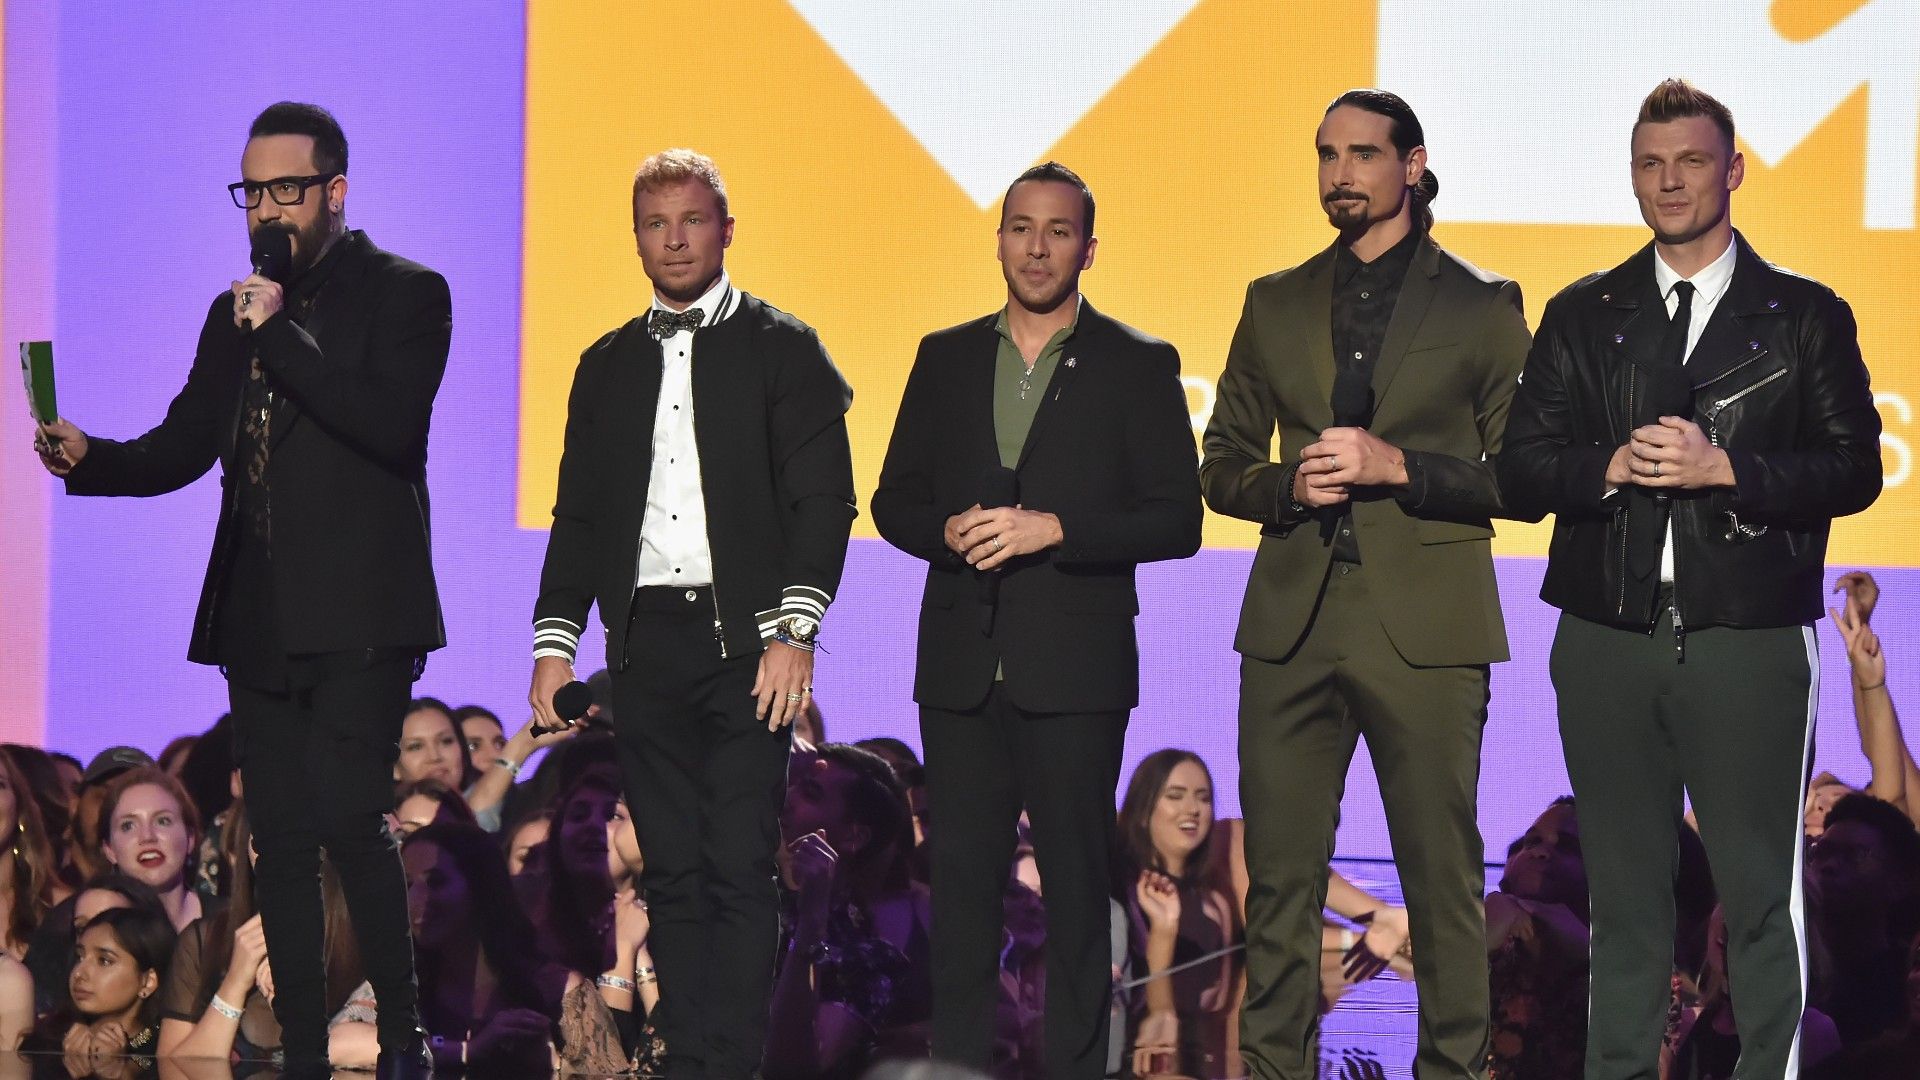 The Backstreet Boys Talk About Parenting While on Tour